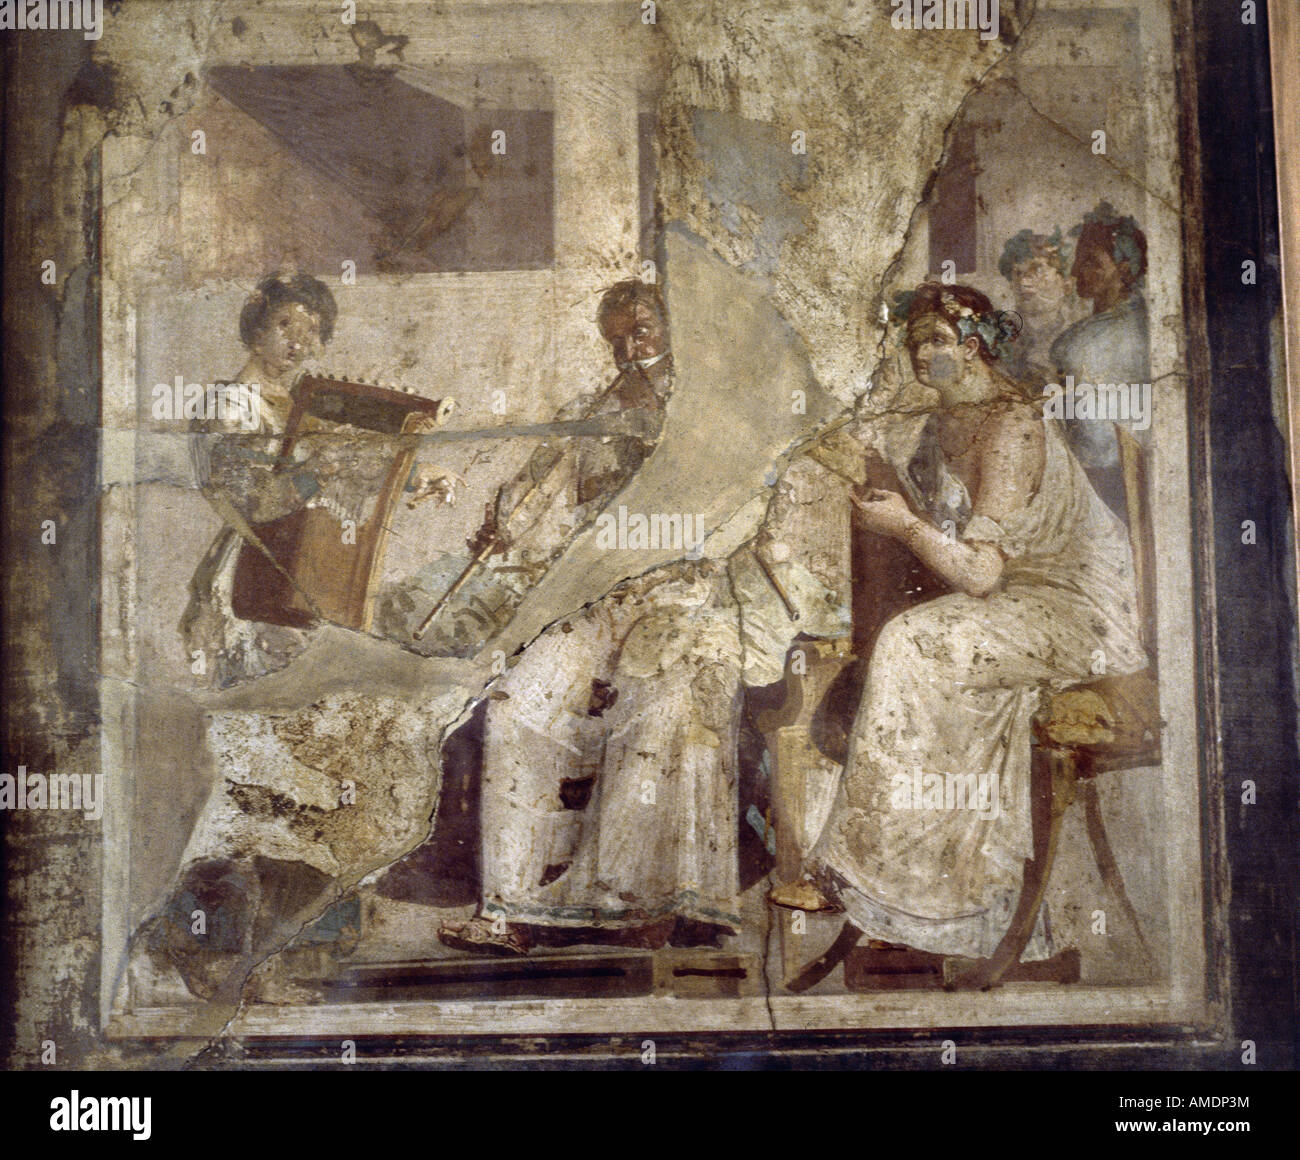 fine arts, ancient world, Roman Empire, mural painting, musicians, Herculaneum, 1st century, AD, Archeological National Museum, Naples, , Artist's Copyright has not to be cleared Stock Photo